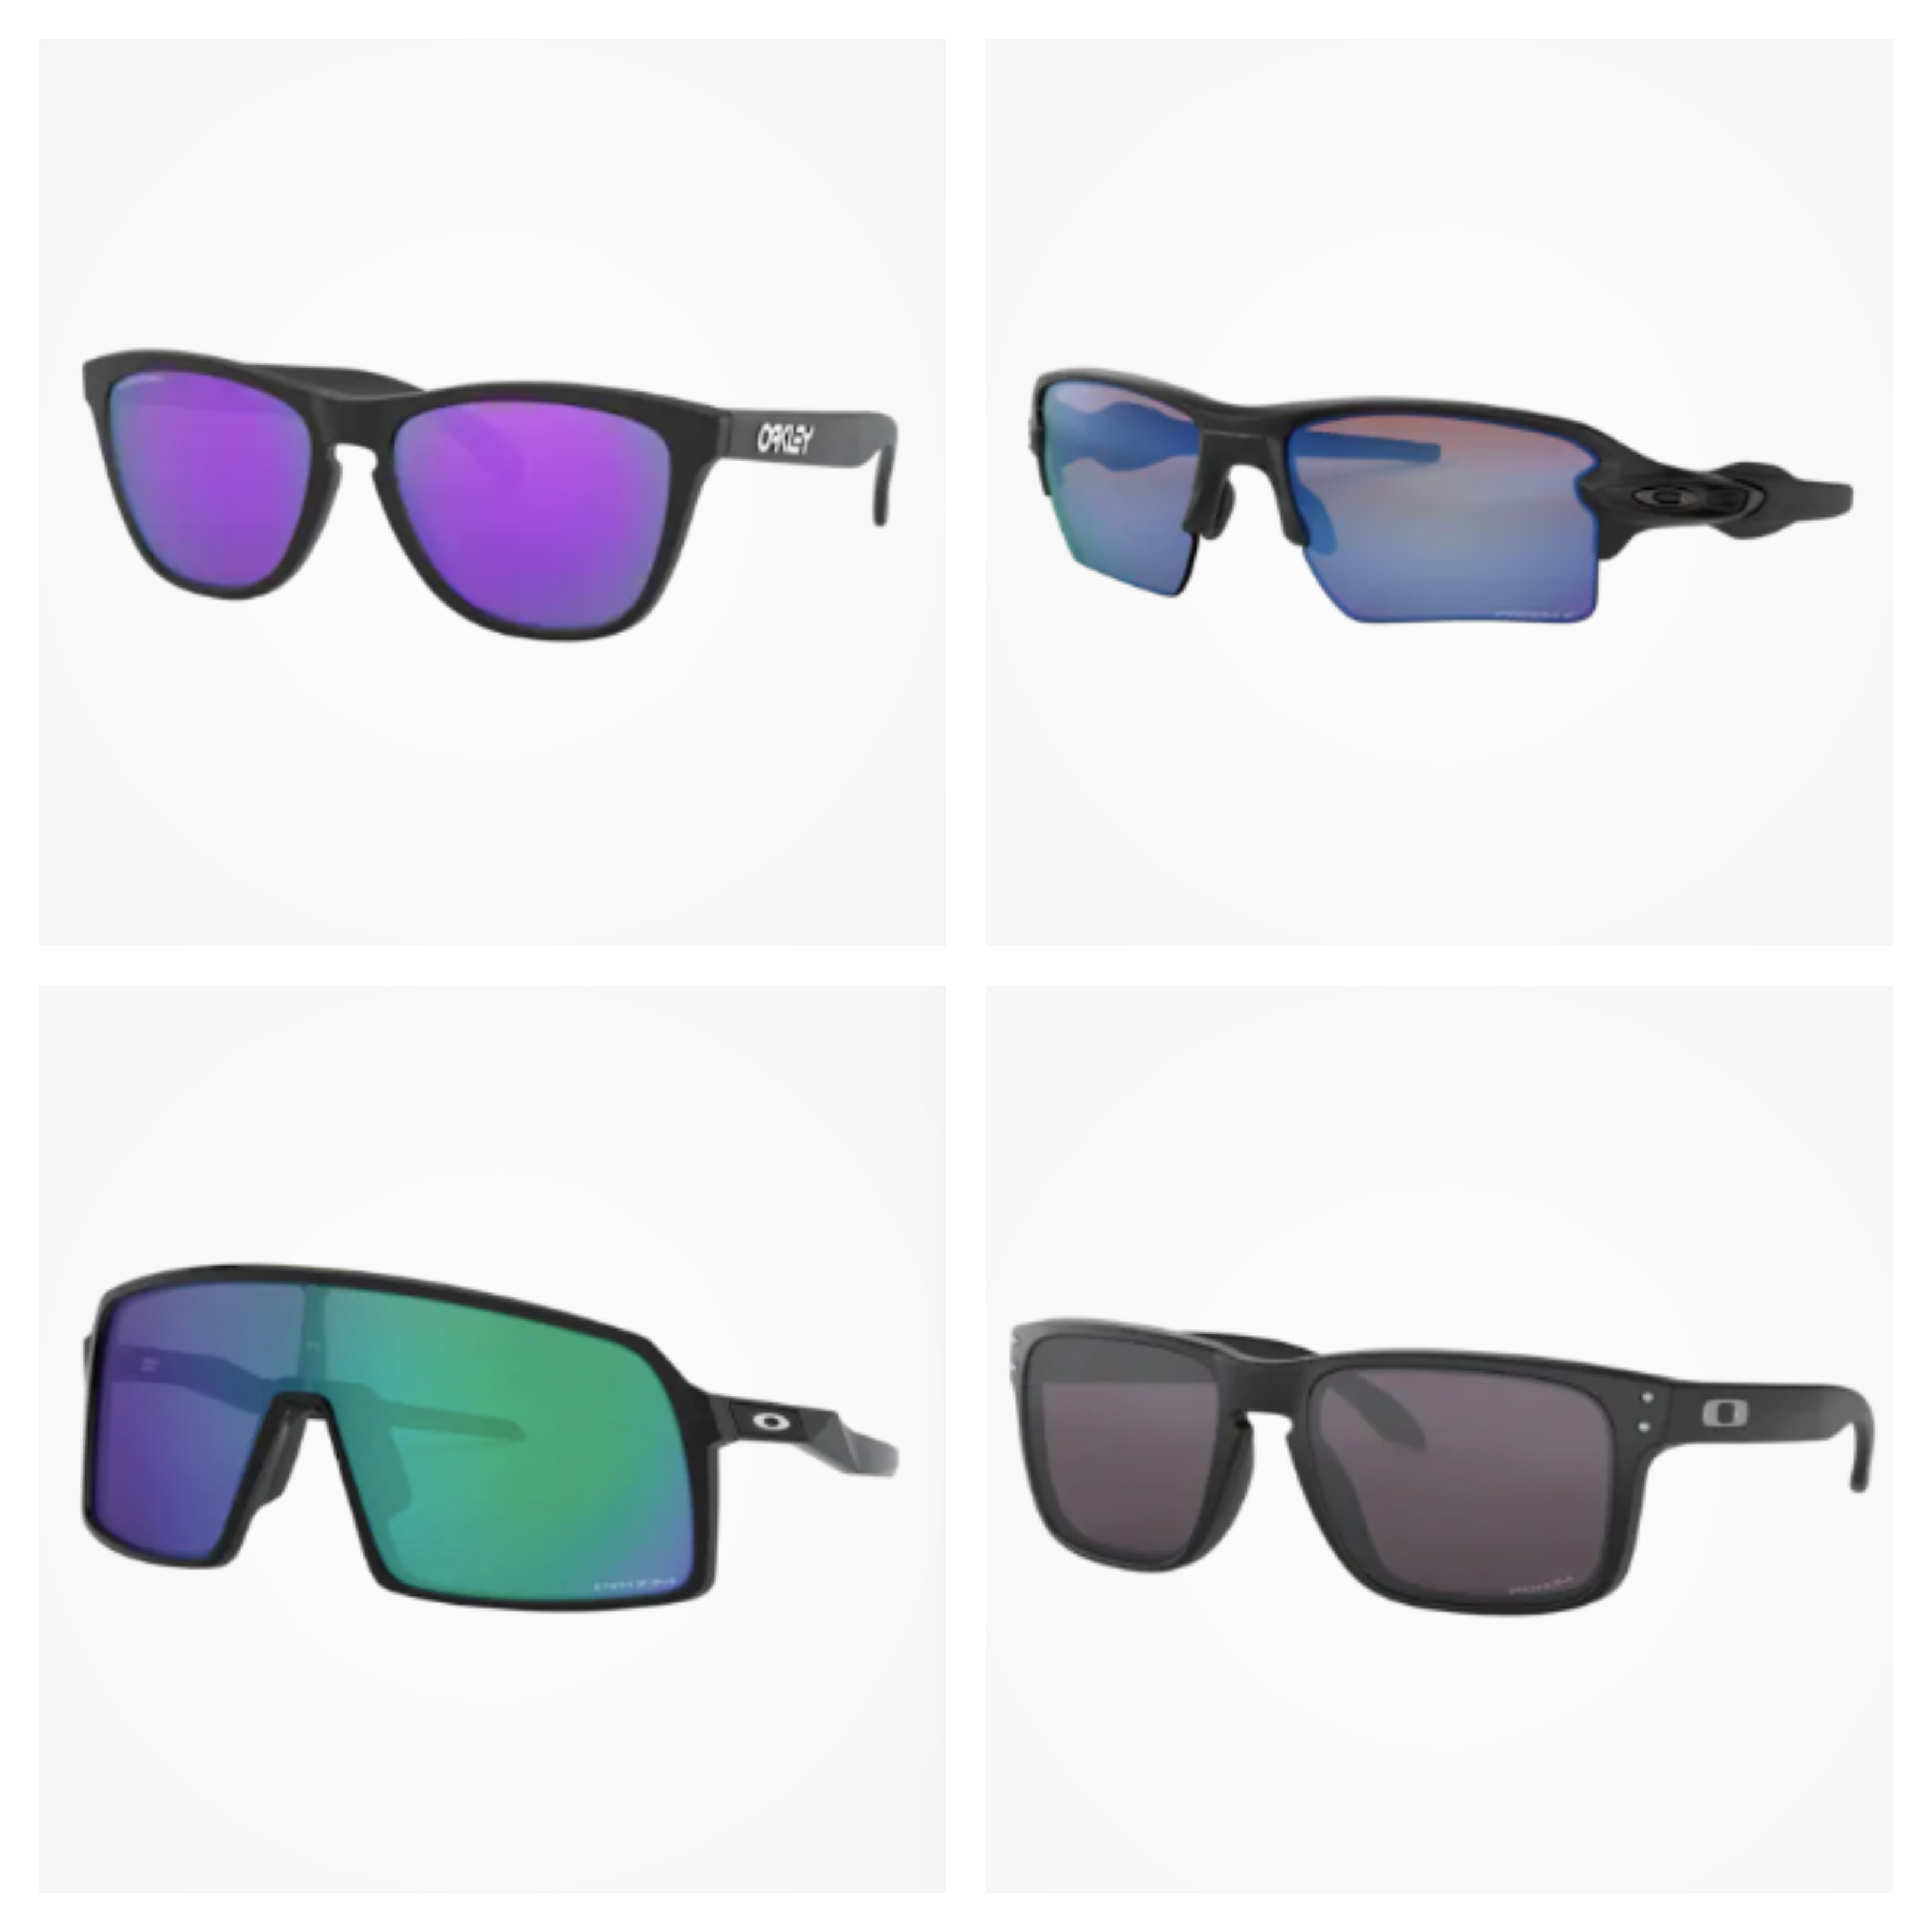 Oakley 30% Off Sale - Steal These Looks From Athletes Like Patrick